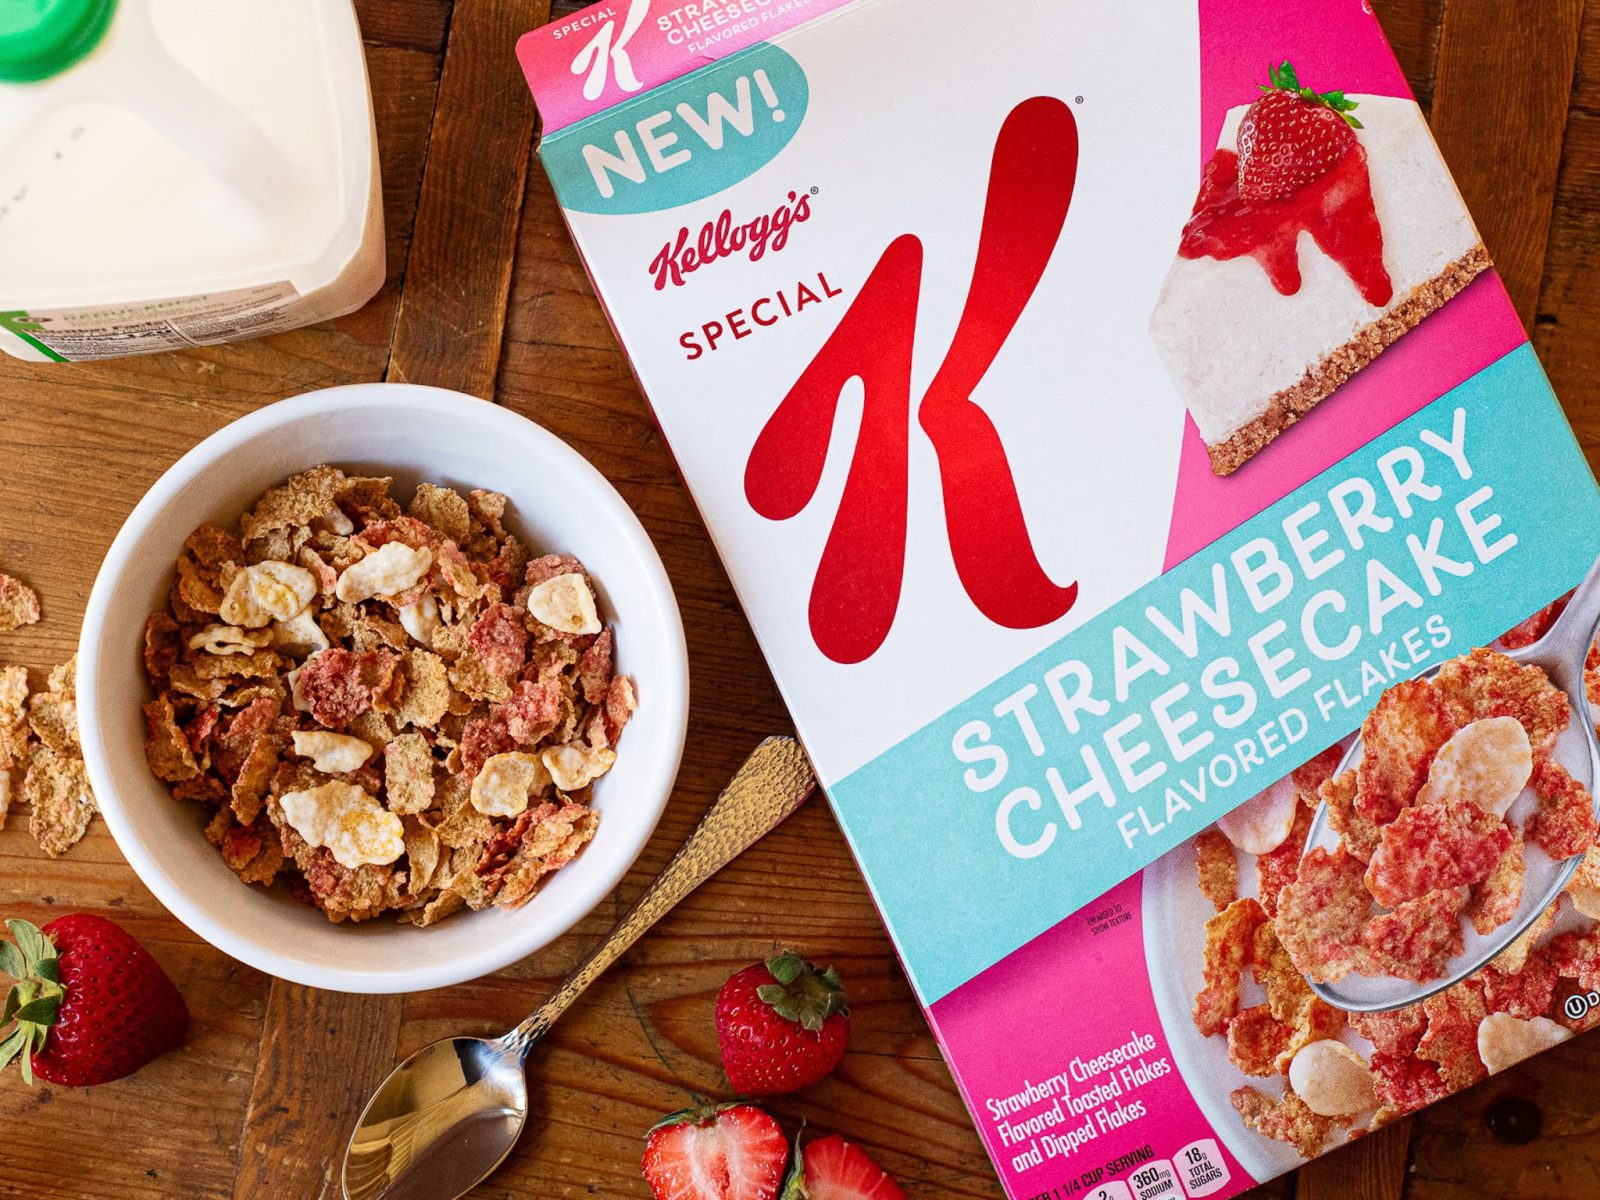 Kellogg’s Special K Stawberry Cheesecake Cereal As Low As $1.49 At Kroger